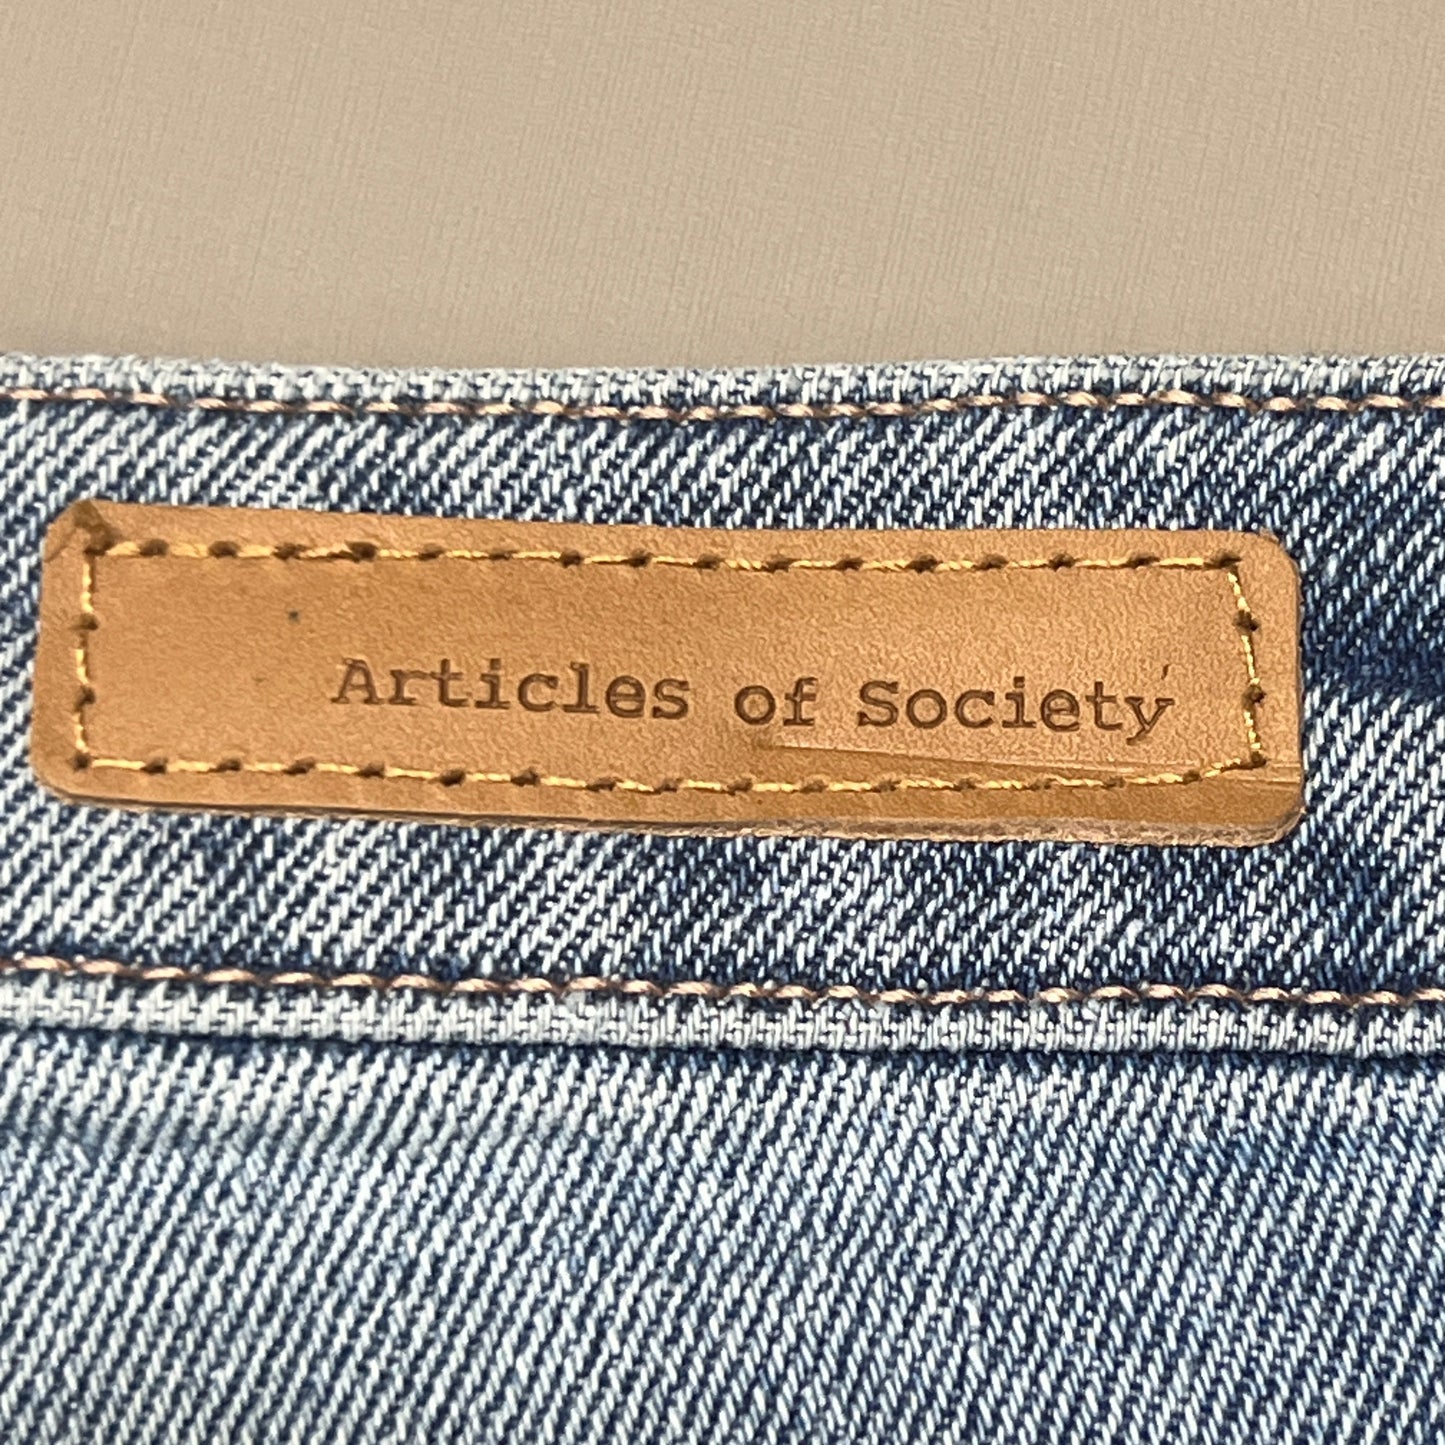 ARTICLES OF SOCIETY Orchidland Ripped Denim Jeans Women's Sz 31 Blue 4009TQ3-717 (New)